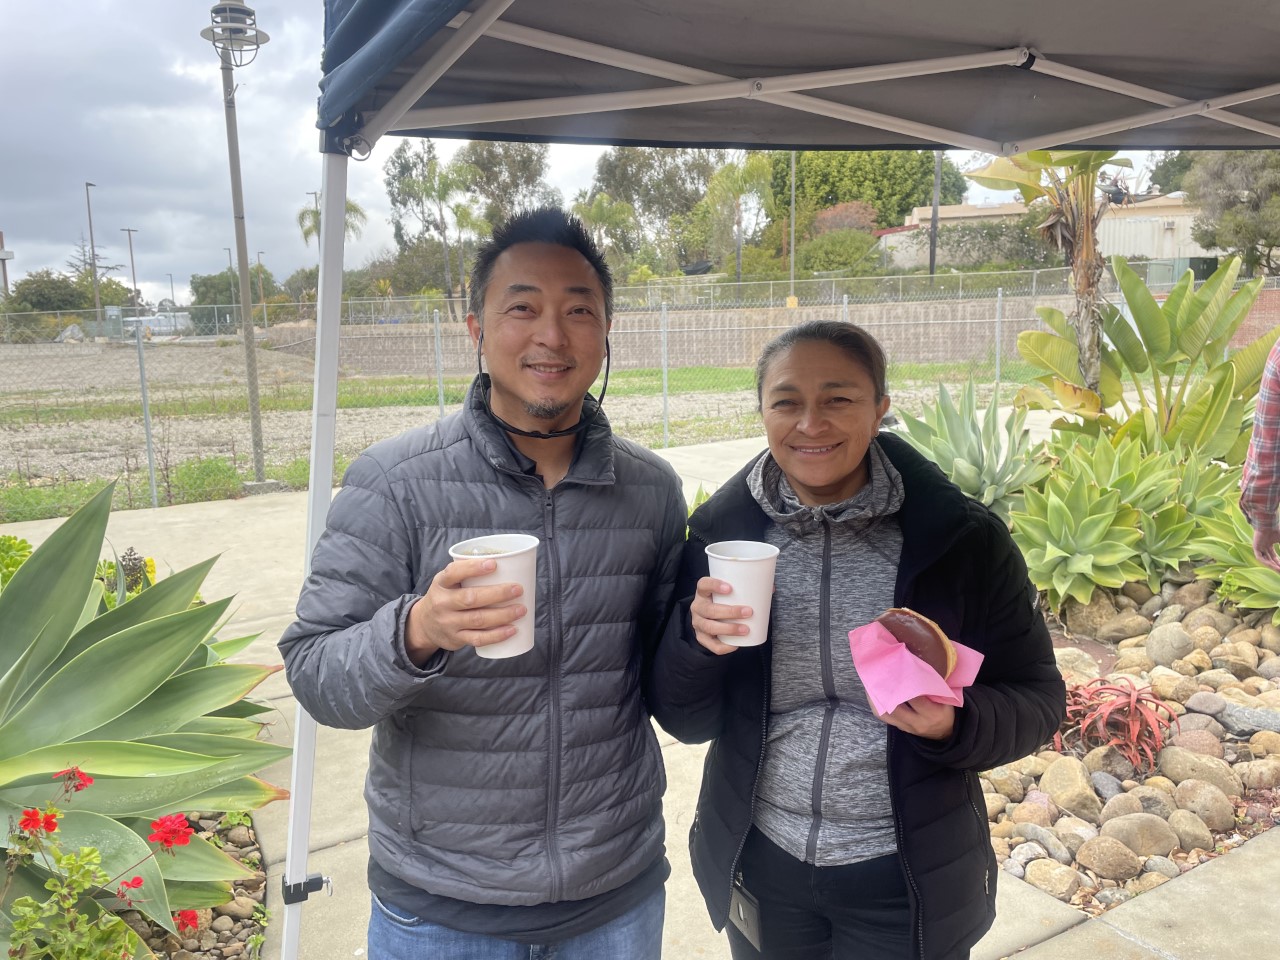 A man and a woman smile holding coffee and donuts.